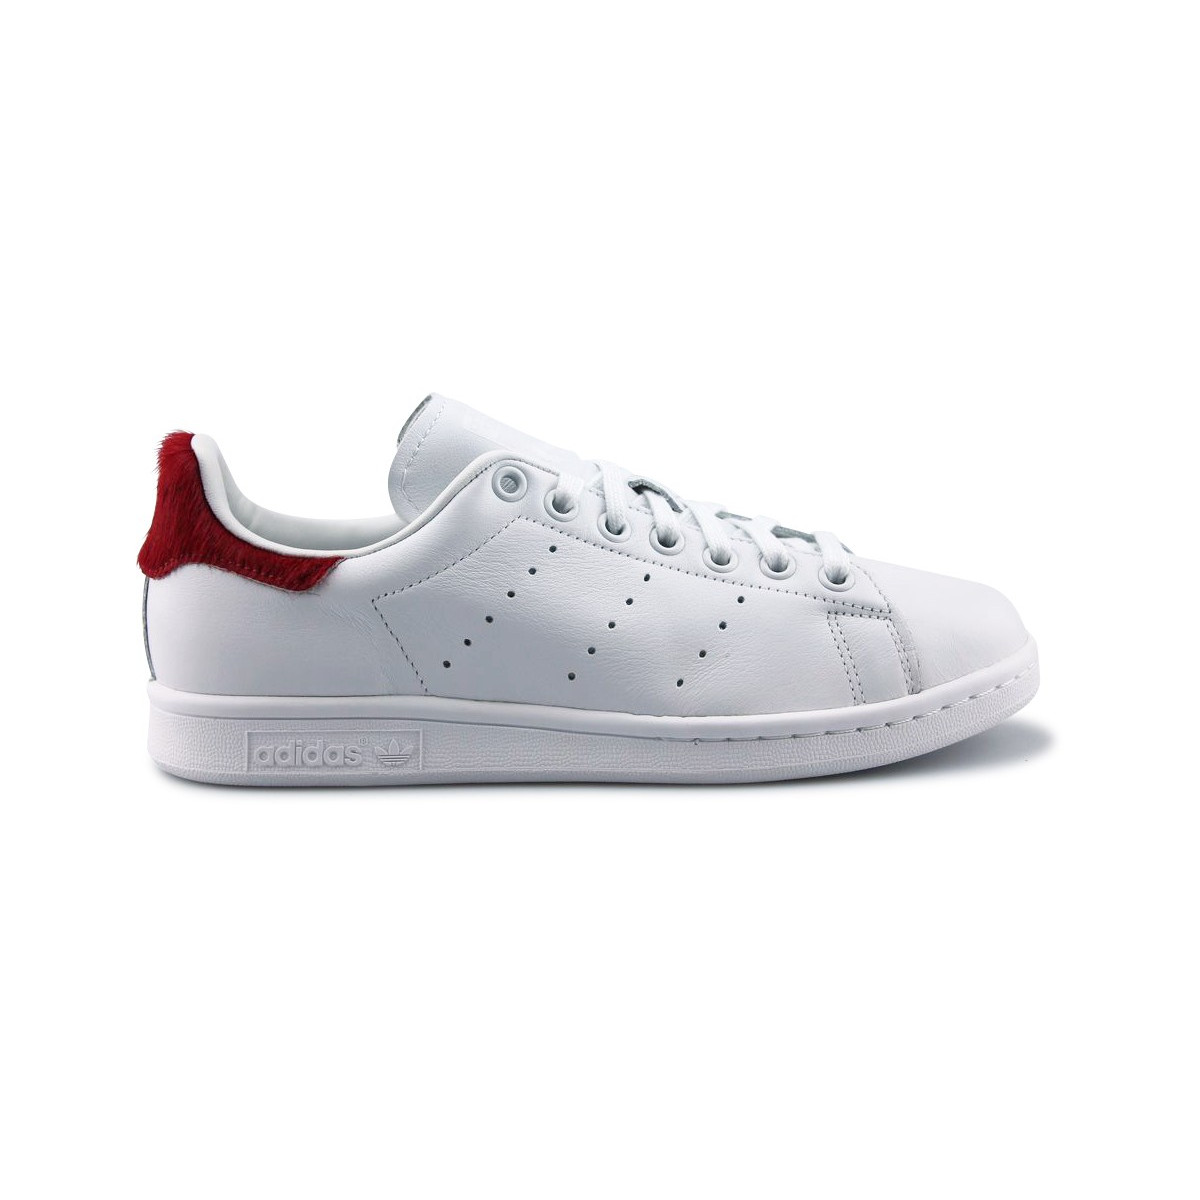 adidas stan smith rouge 37